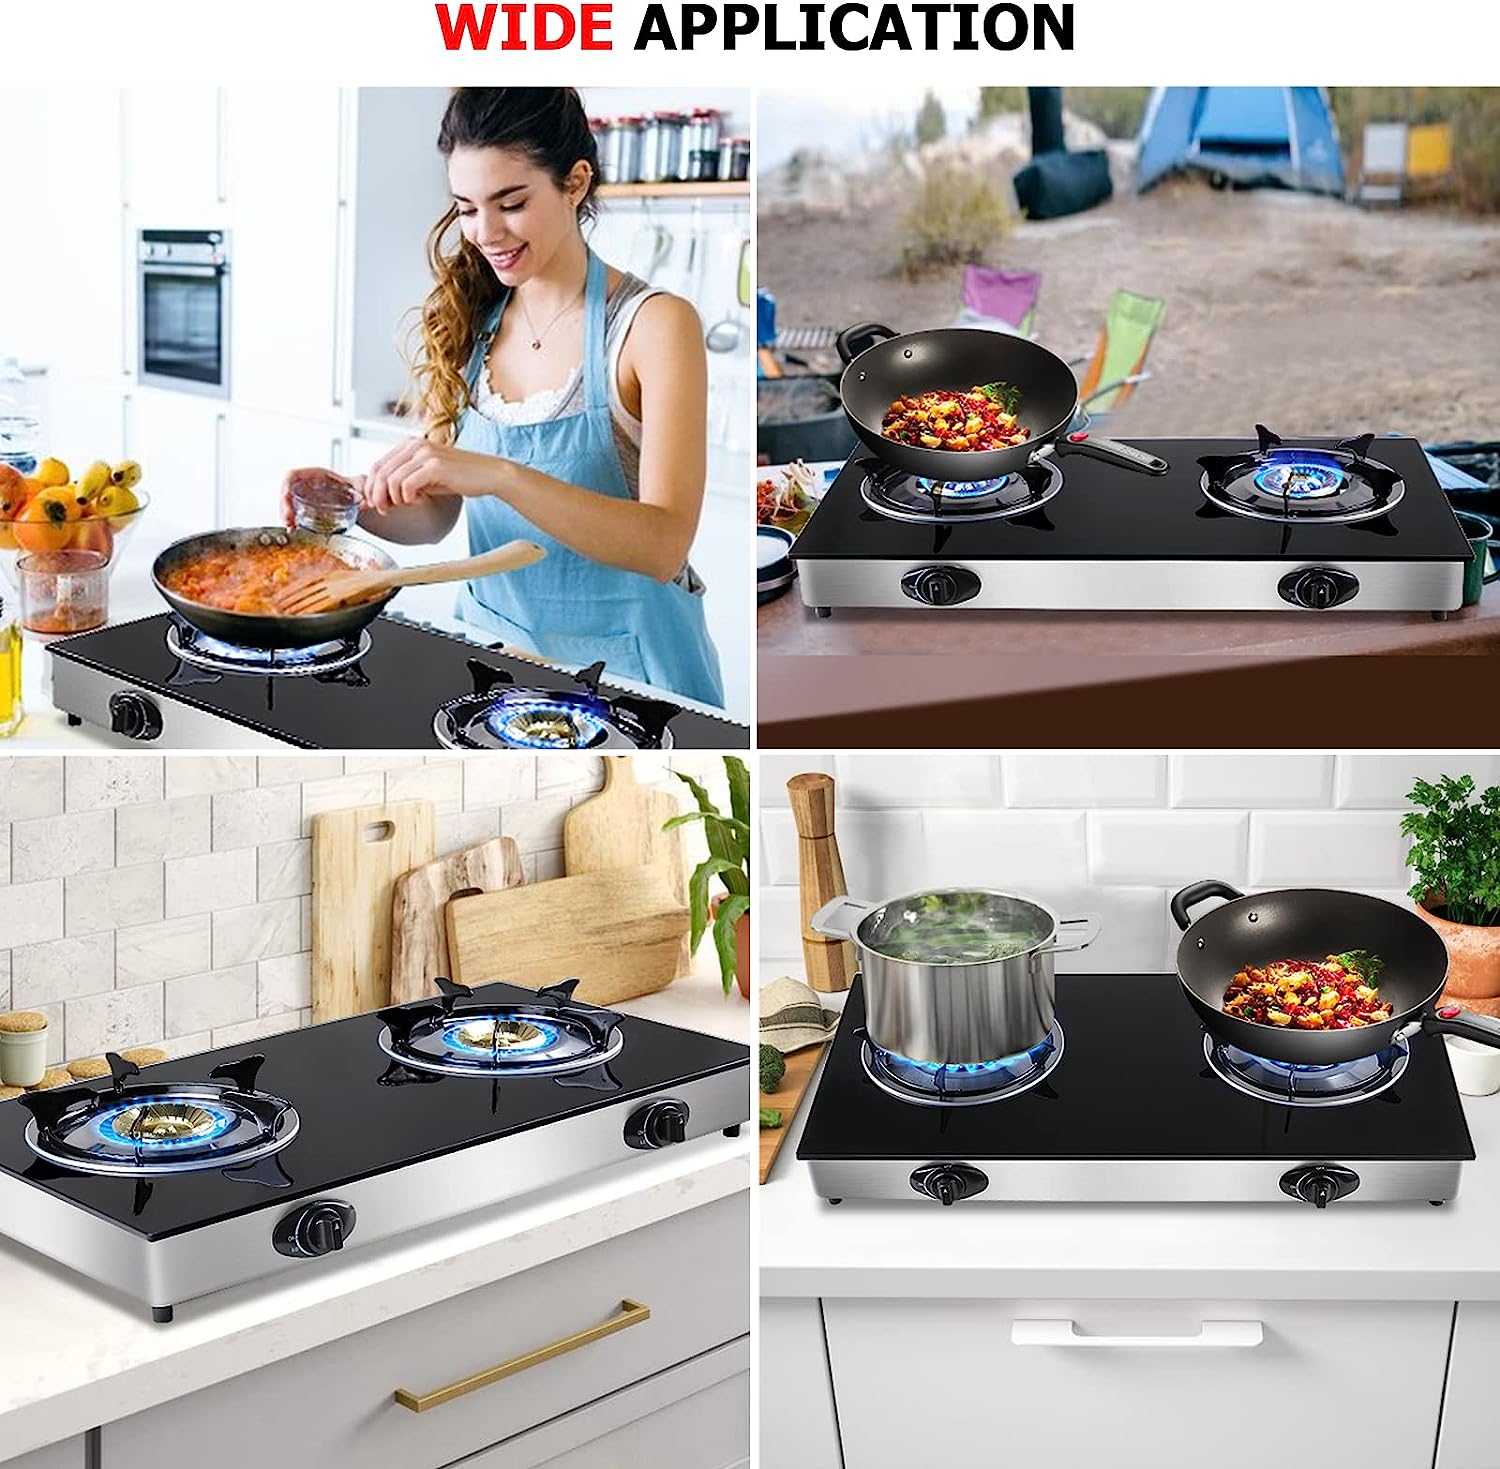 https://discounttoday.net/wp-content/uploads/2023/06/Forimo-Propane-Gas-Cooktop-2-Burners-Stove-portable-gas-stove-Tempered-Glass-Double-Auto-Ignition-Camping-Burner-LPG-for-RV-Apartments-Outdoor-7.jpg